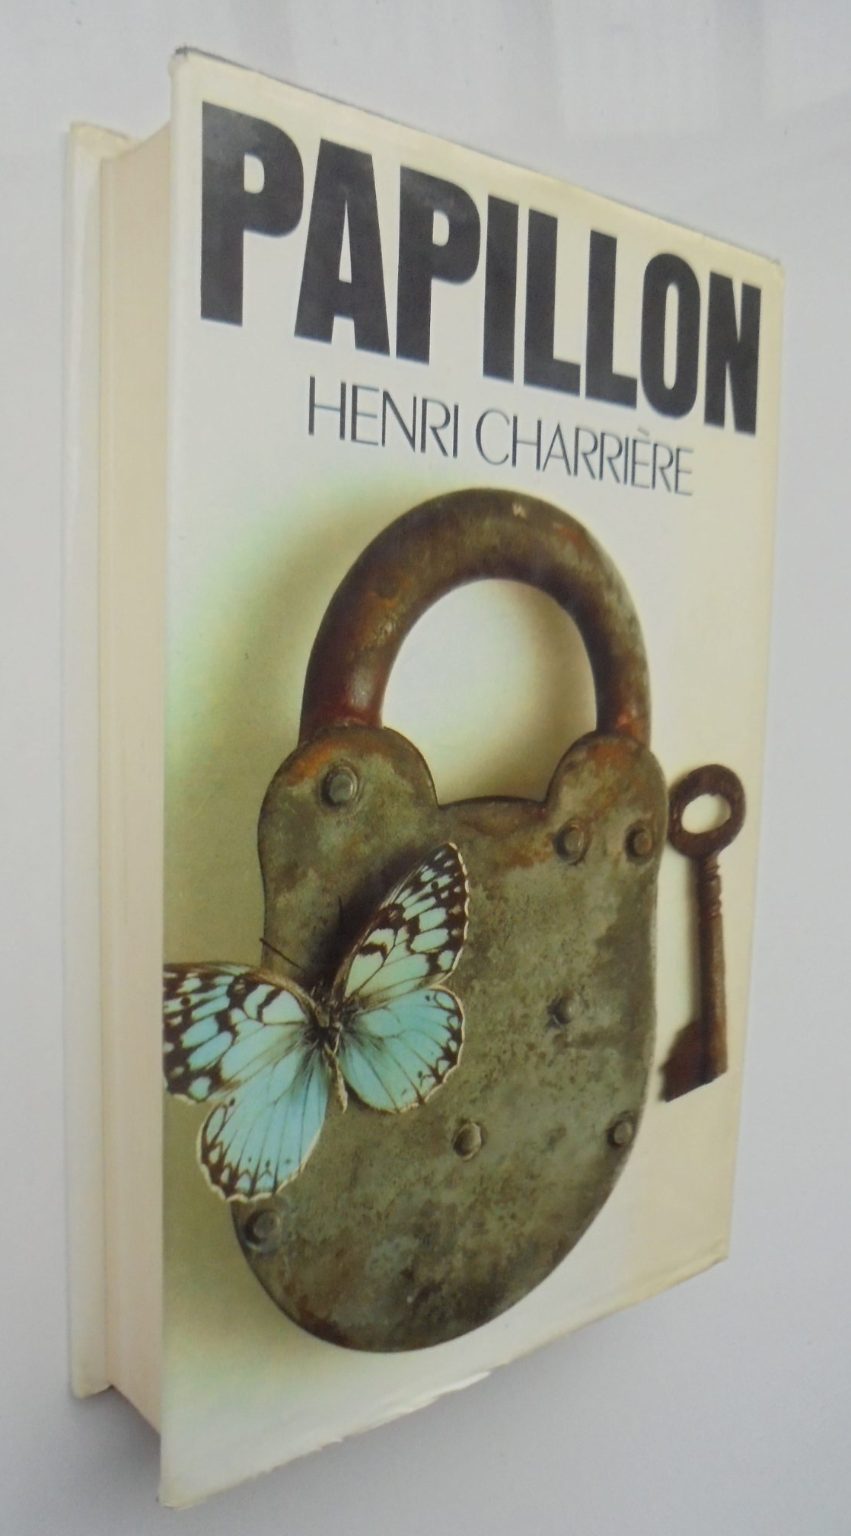 Papillon By Henri Charriere and Translated by Patrick O'Brian (Hardback 1970)